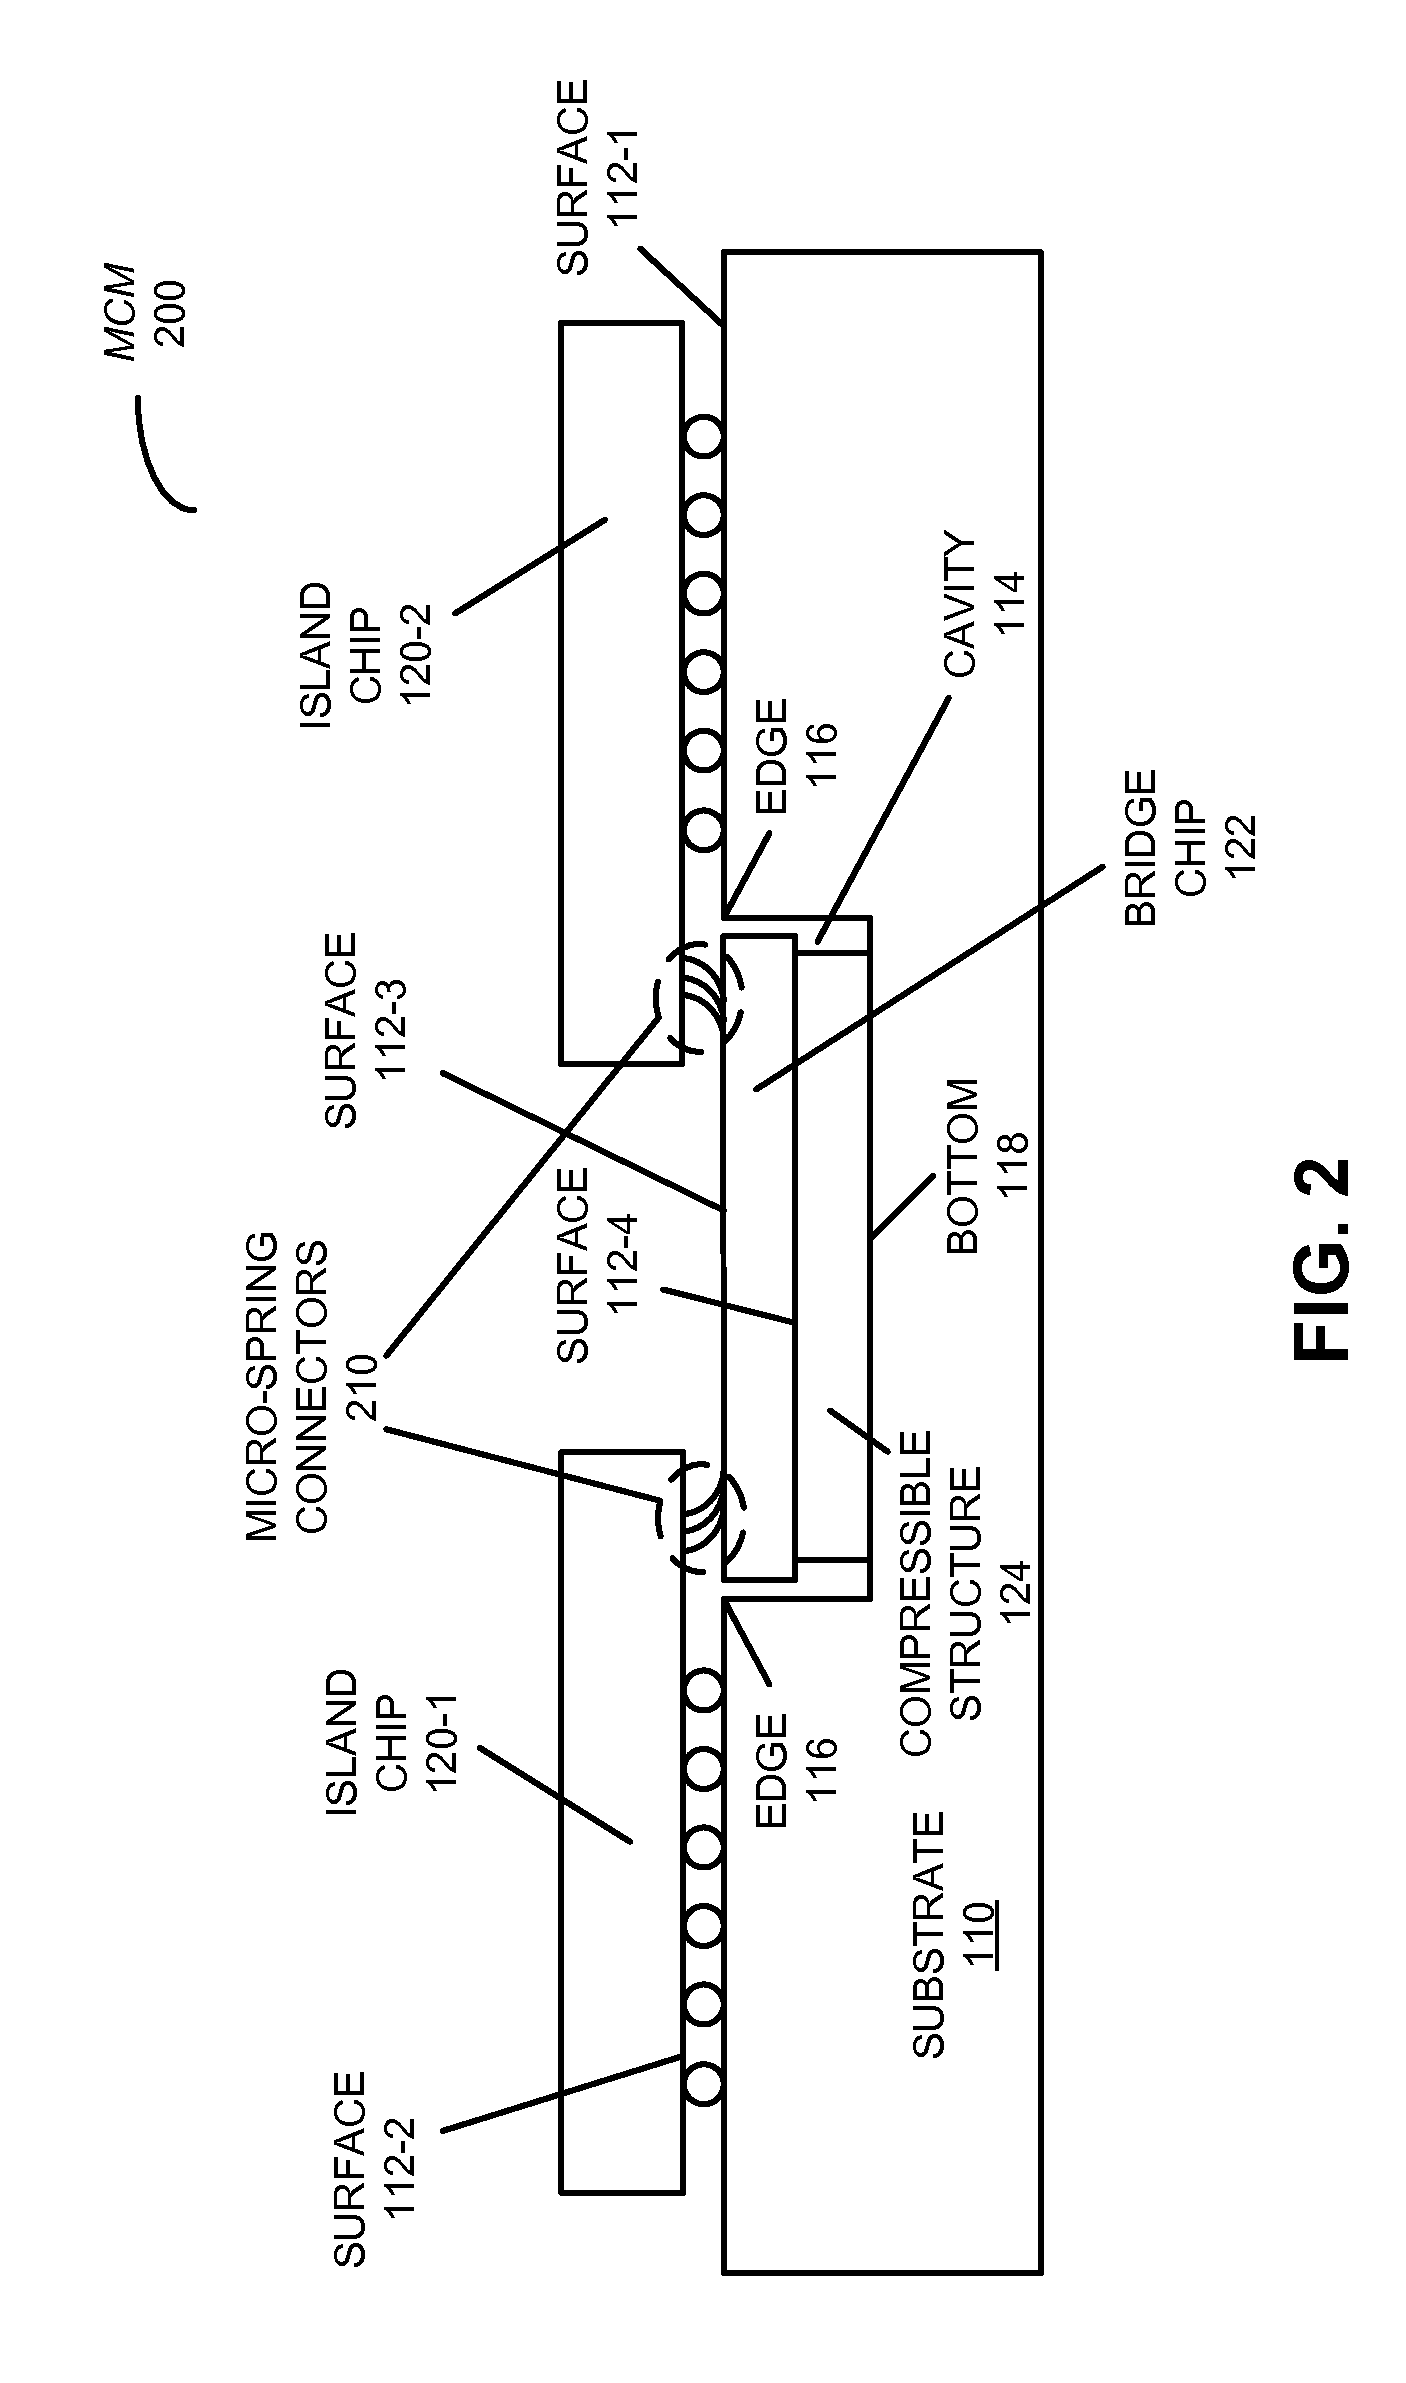 Maintaining alignment in a multi-chip module using a compressible structure